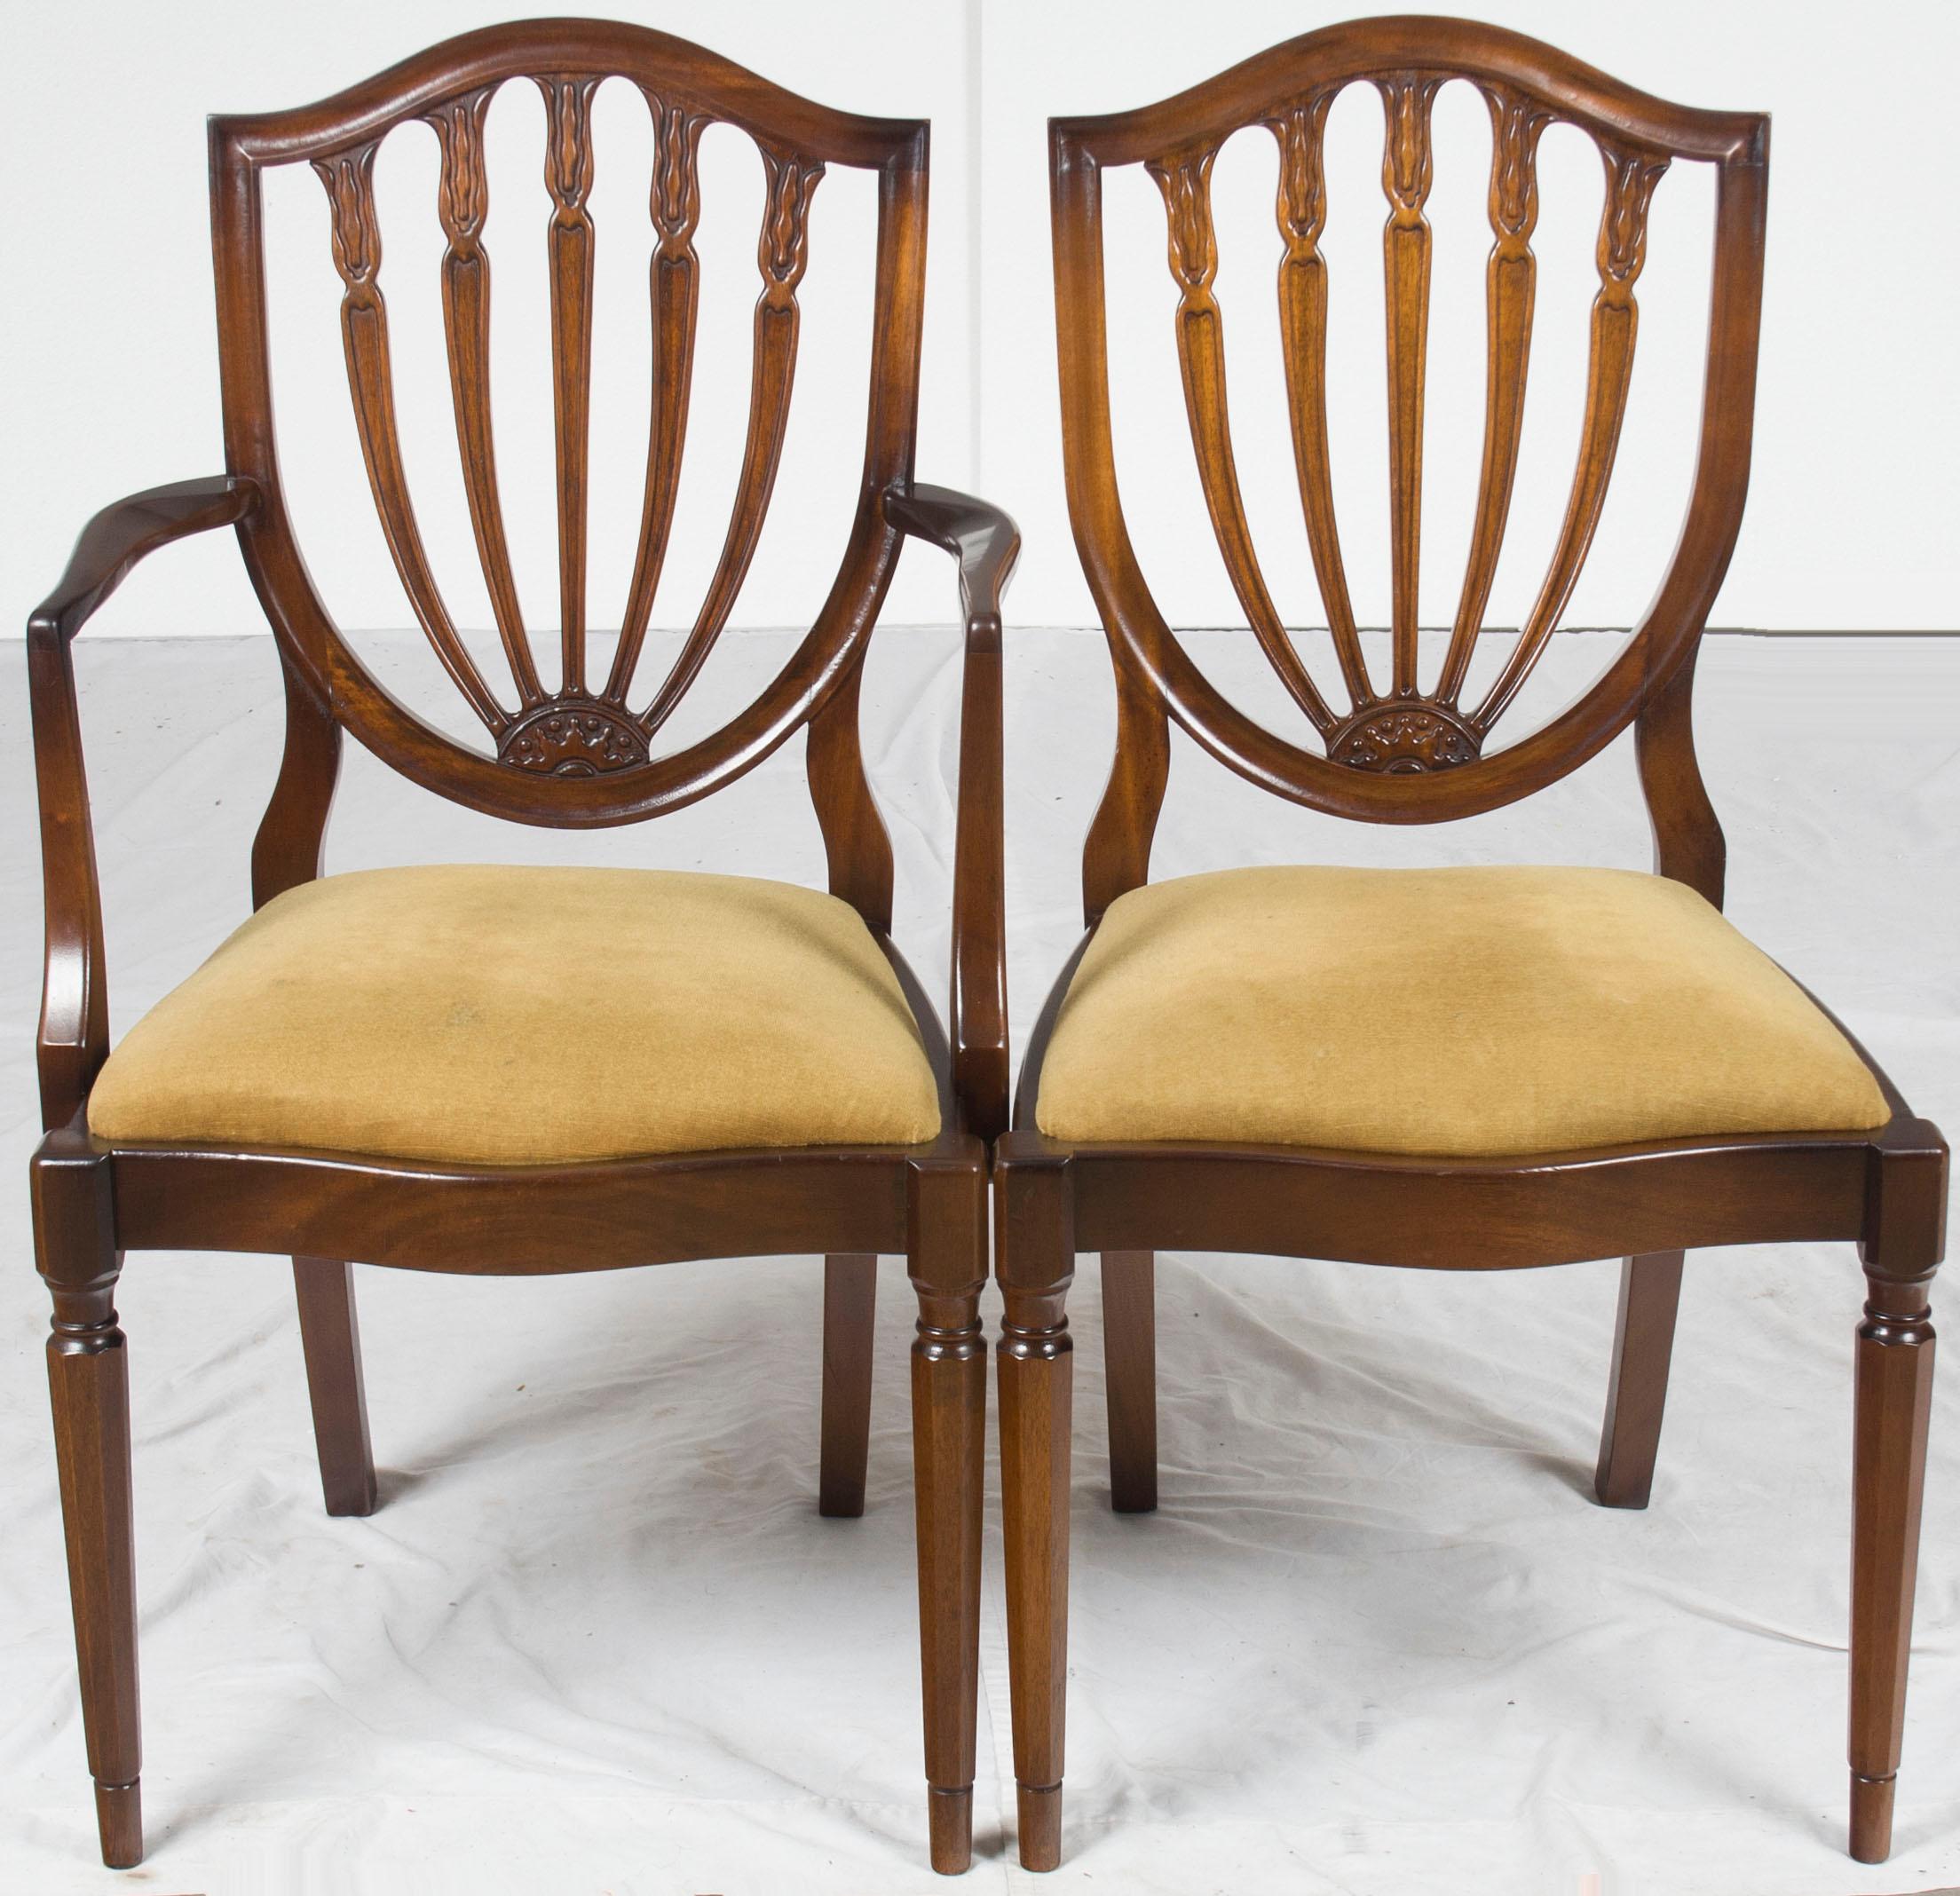 These gorgeous mahogany Hepplewhite style shield back dining chairs have a beautiful dark mahogany color. The set of dining chairs consists of two arm chairs and six side chairs. Originally made in England around 1960, these chairs are marvelous to